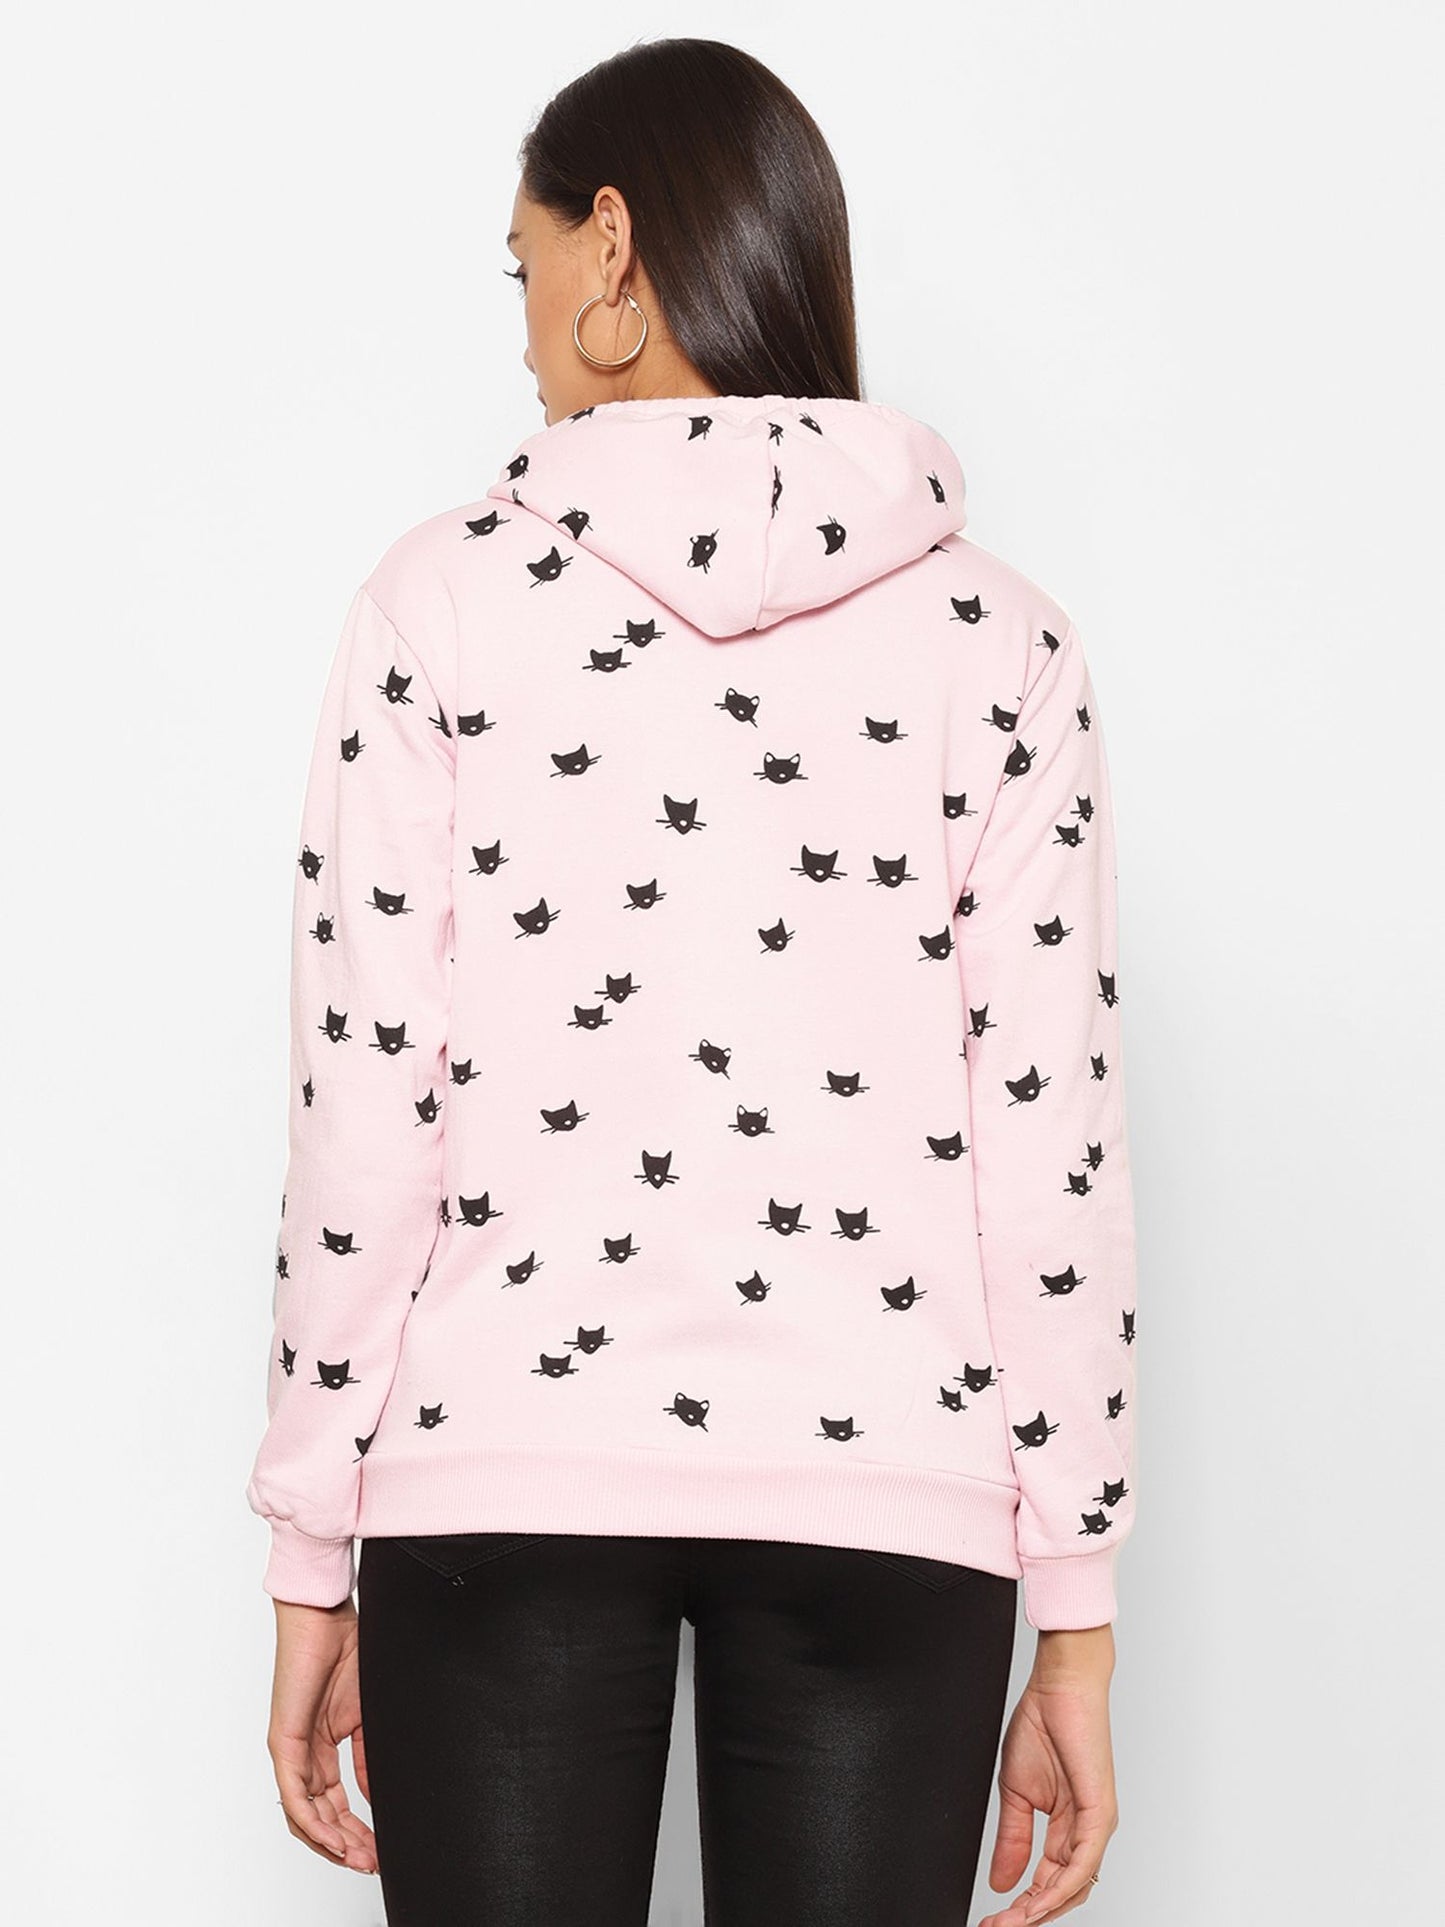 Women's Baby Pink, Printed, Regular Fit Cotton Hoody with Long Sleeves